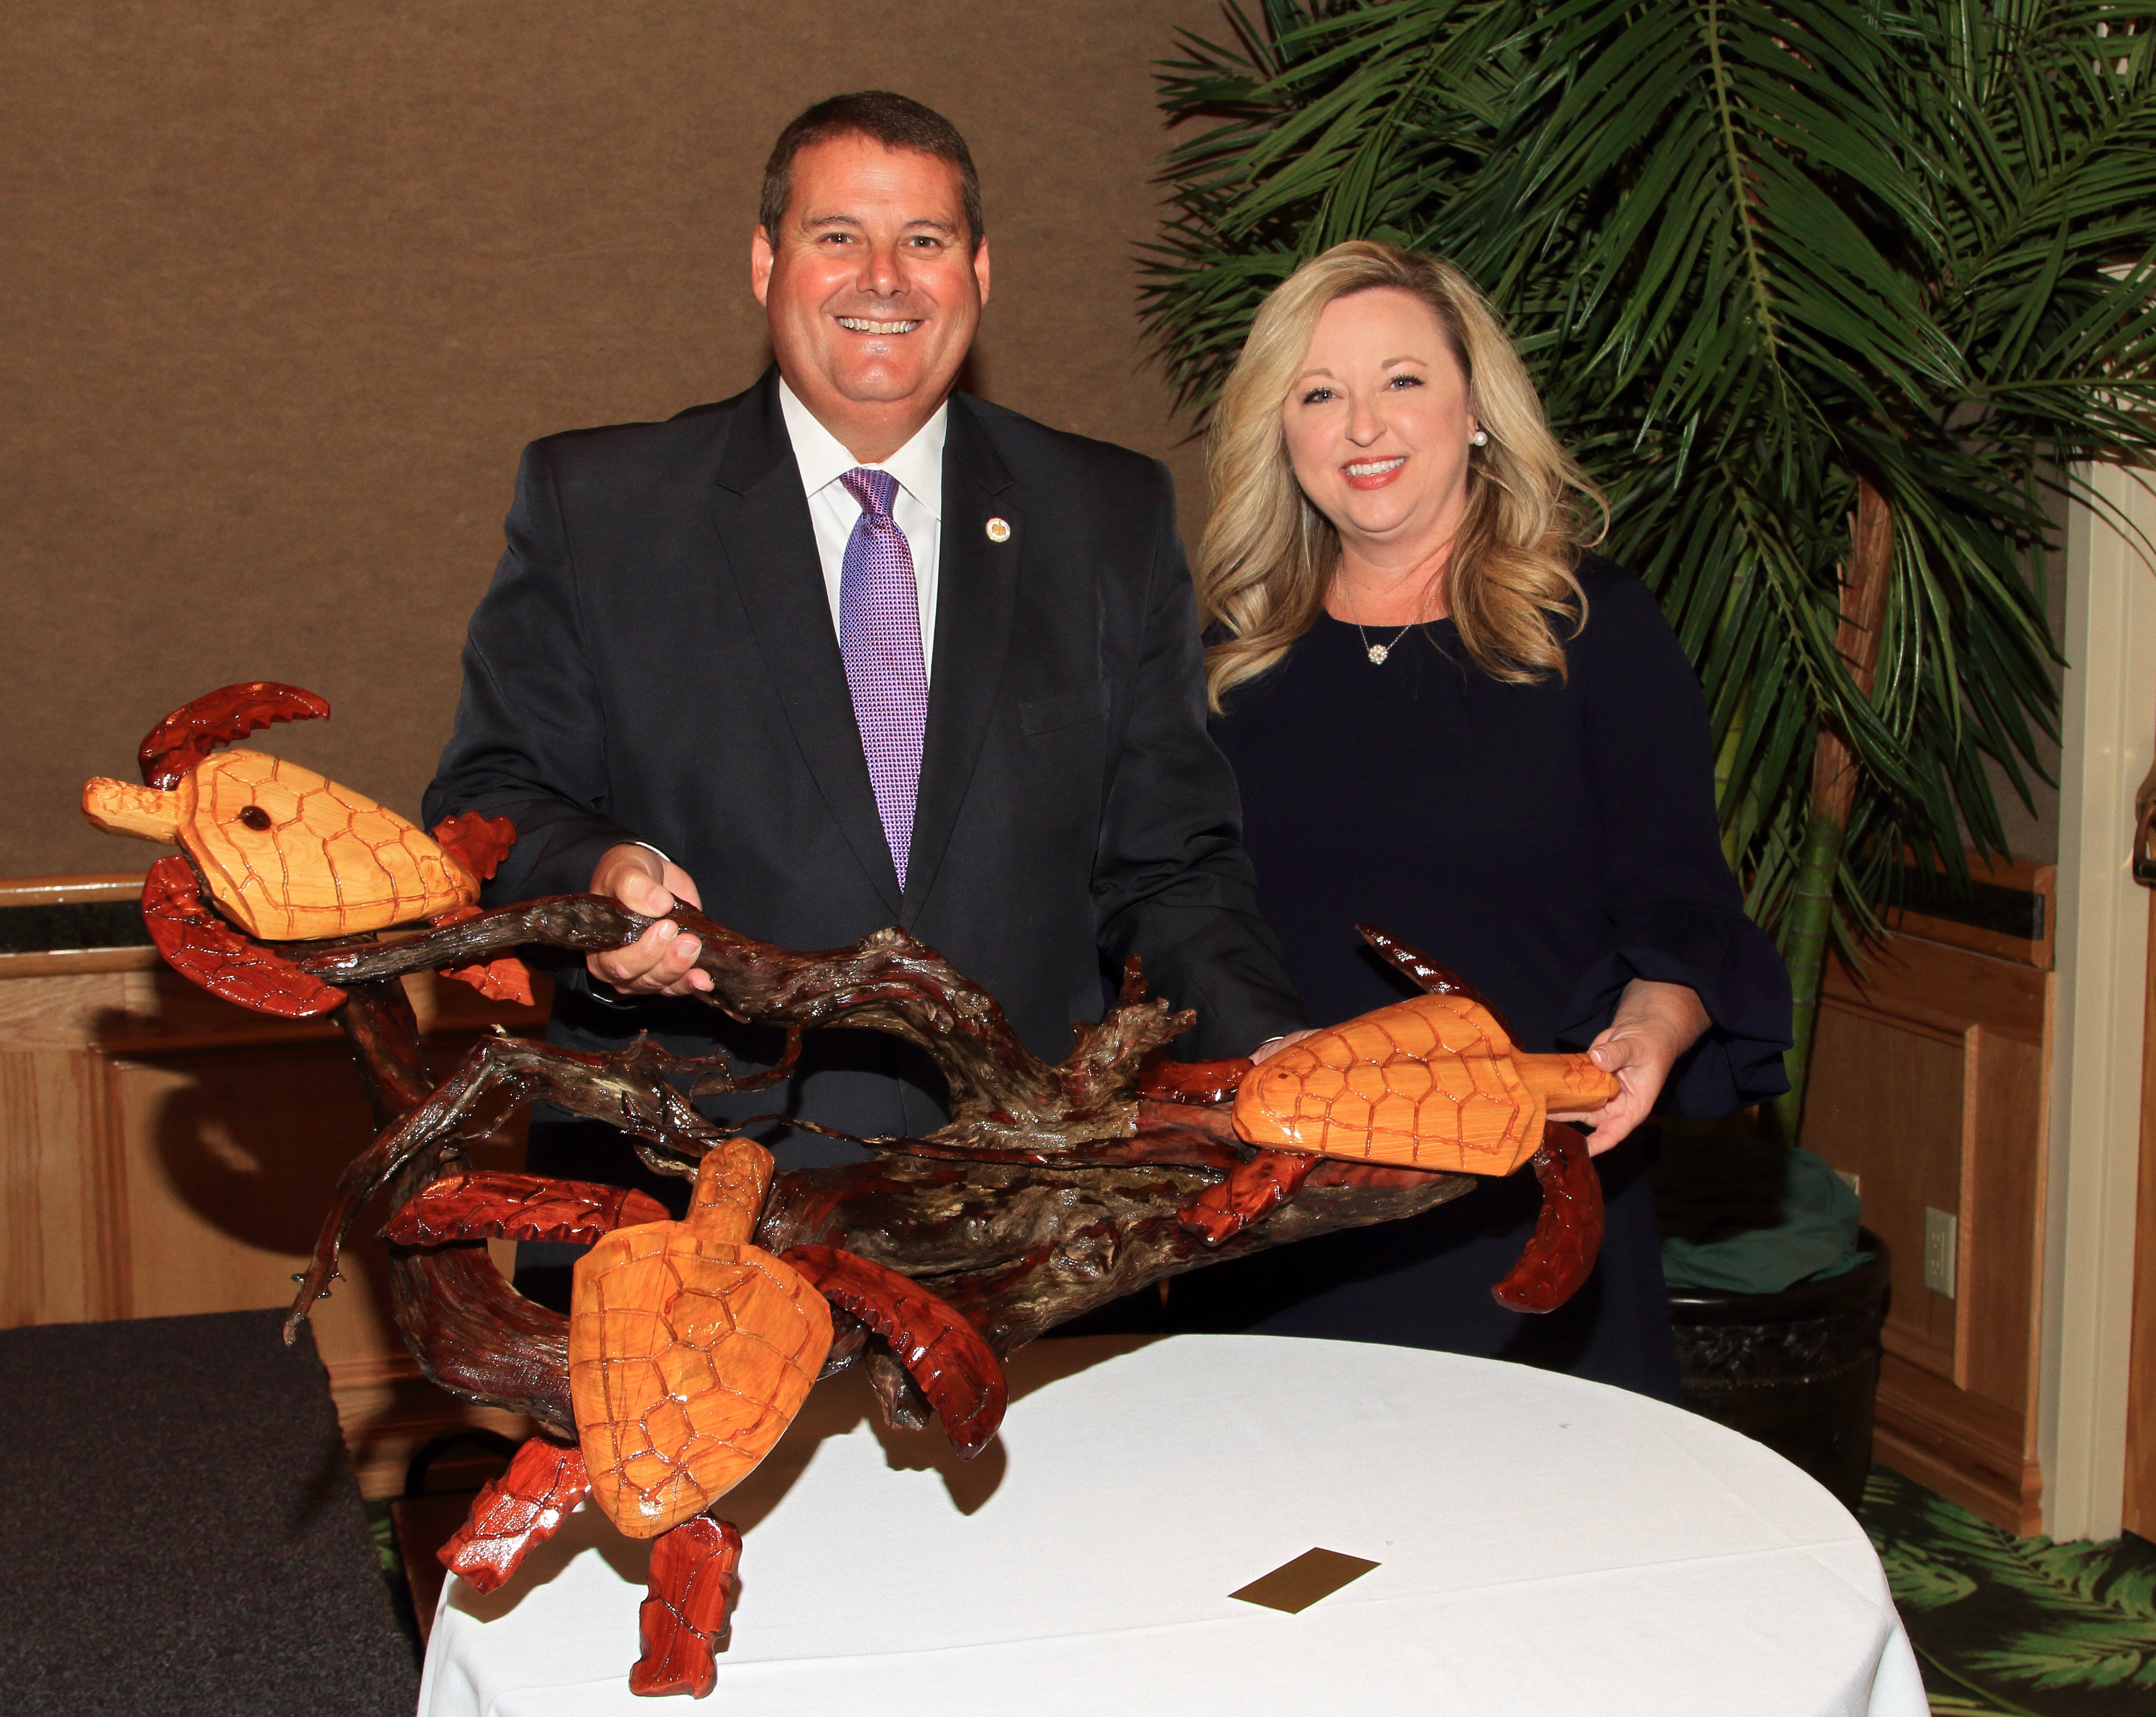 ADCNR Commissioner Chris Blankenship and his wife Allyson after being presented with the 2018 Lyles-Simpson Award.  Photo by Jeff Rester, Gulf States Marine Fisheries Commission